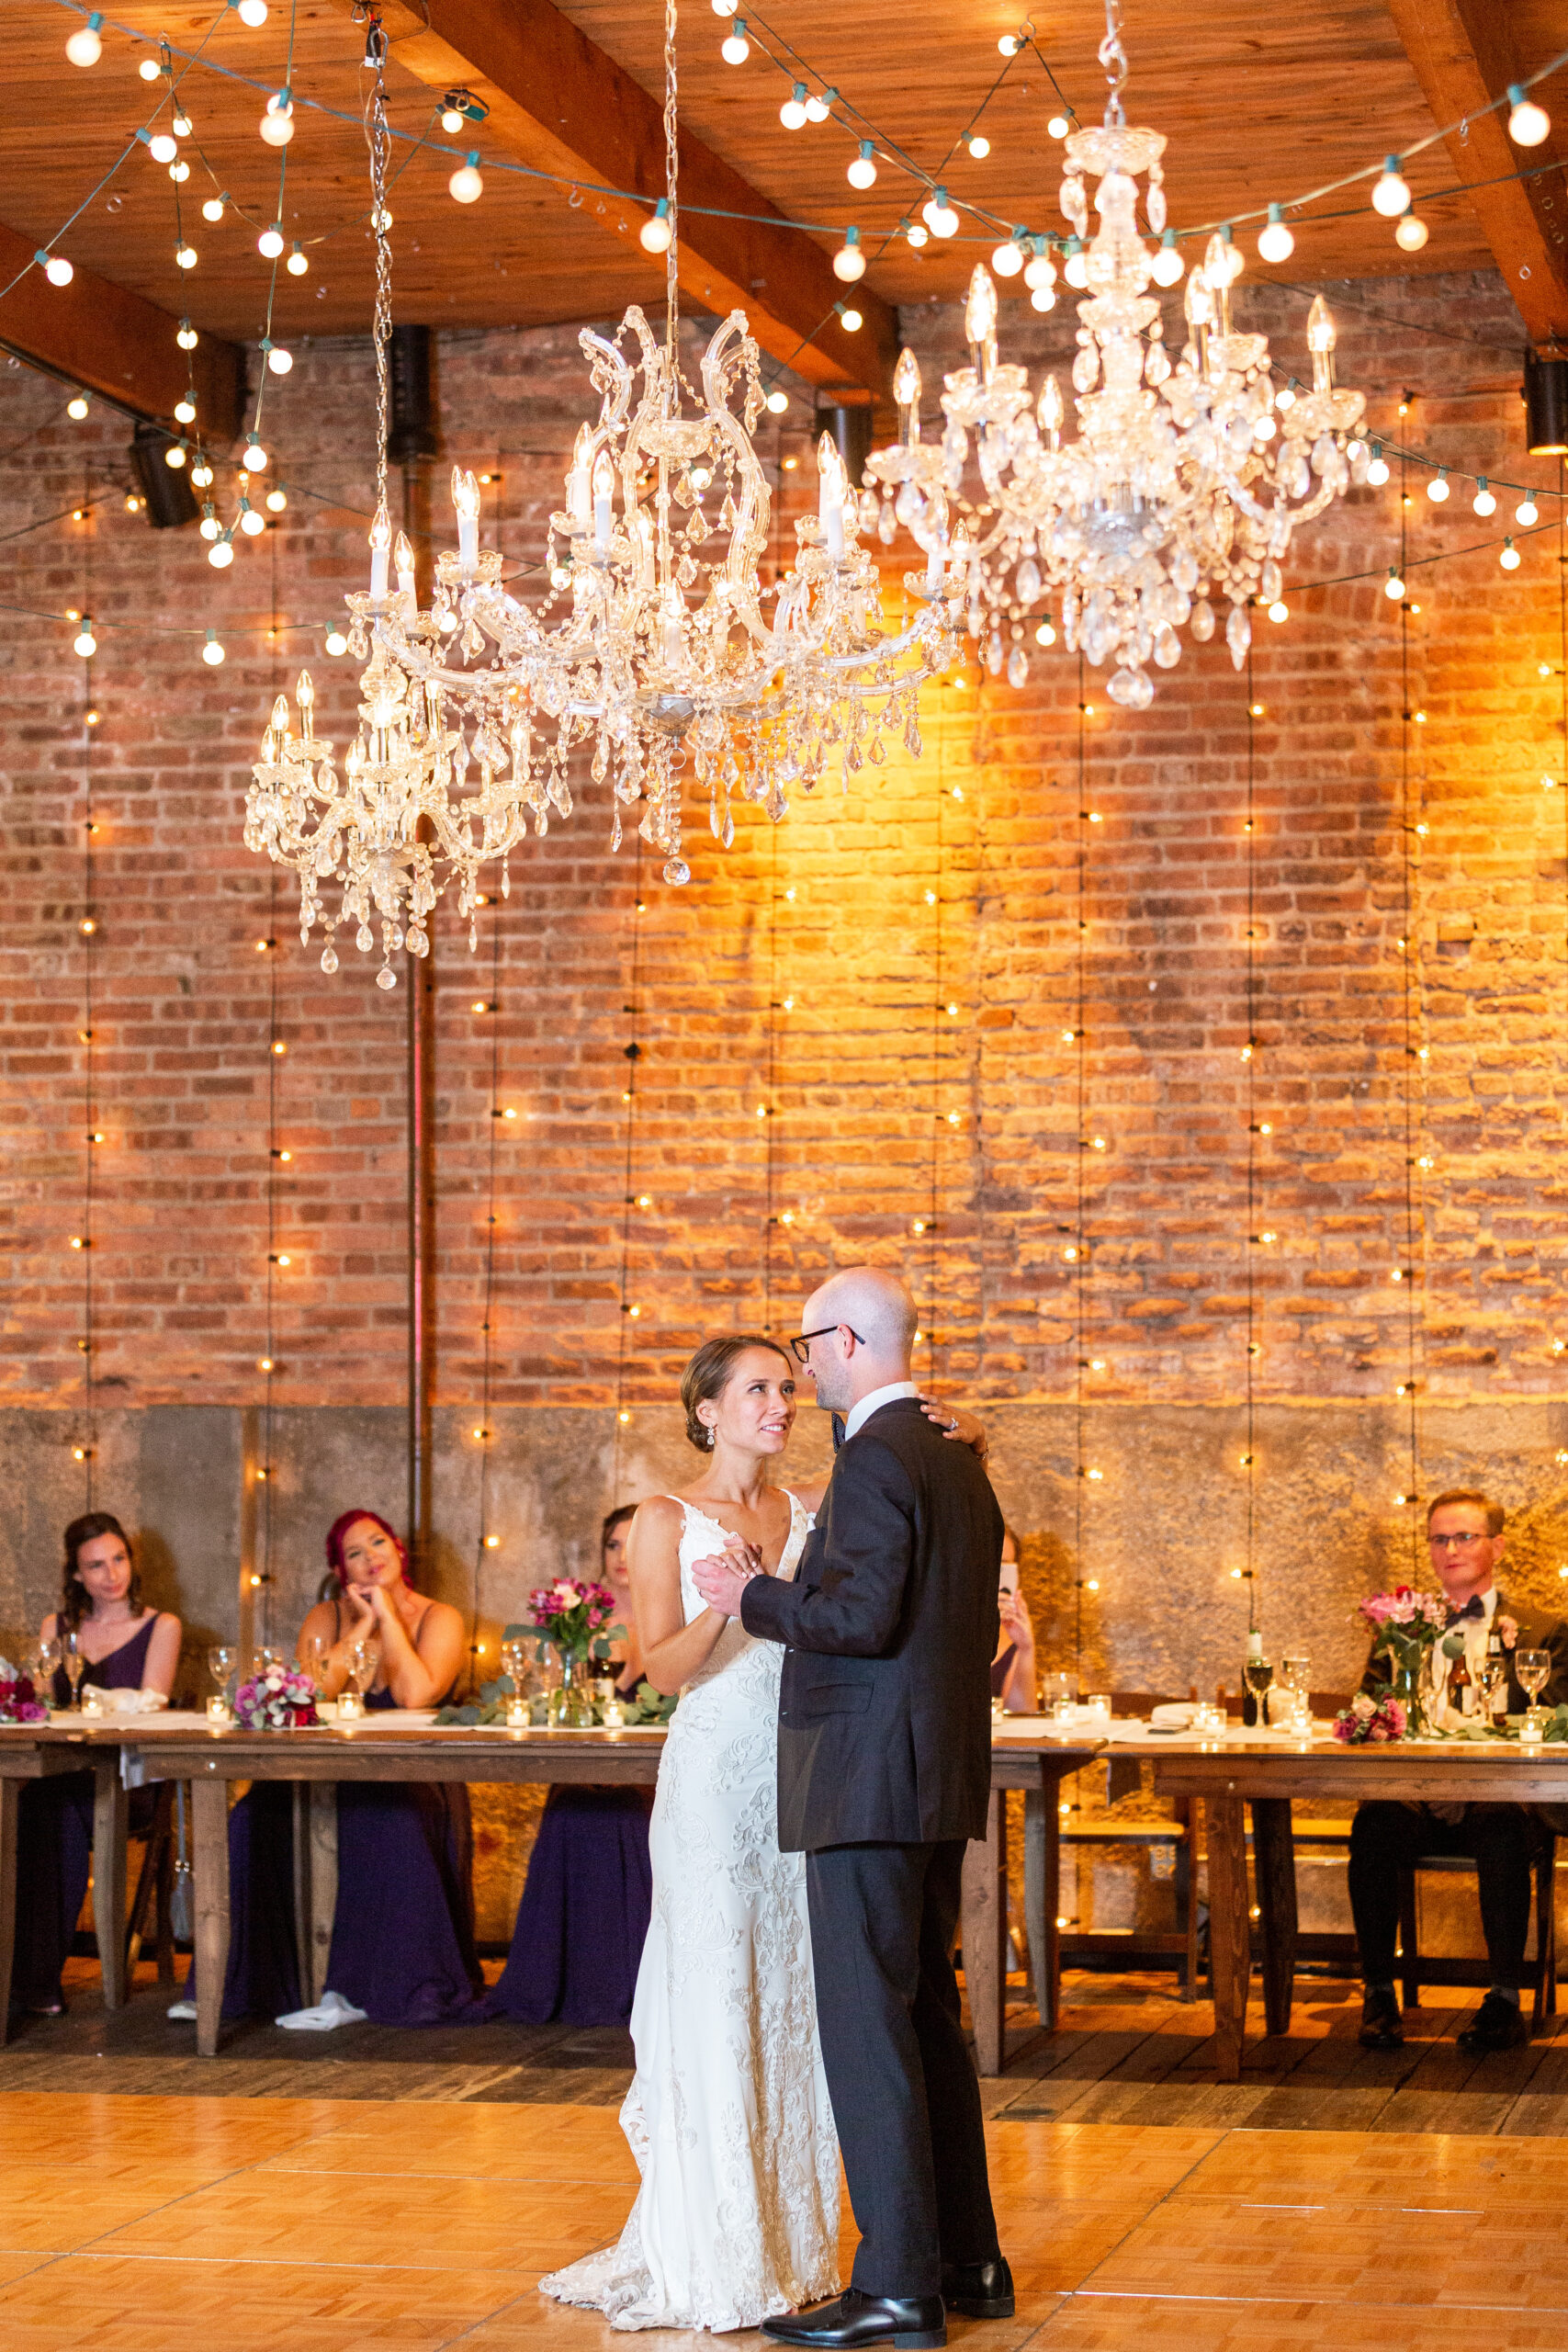 Elegant_Event_Lighting_Chicago_Wedding_Gallery_1028_Reception_Cafe_Light_Wall_Backdrop_Crystal_Chandeliers-scaled.jpg